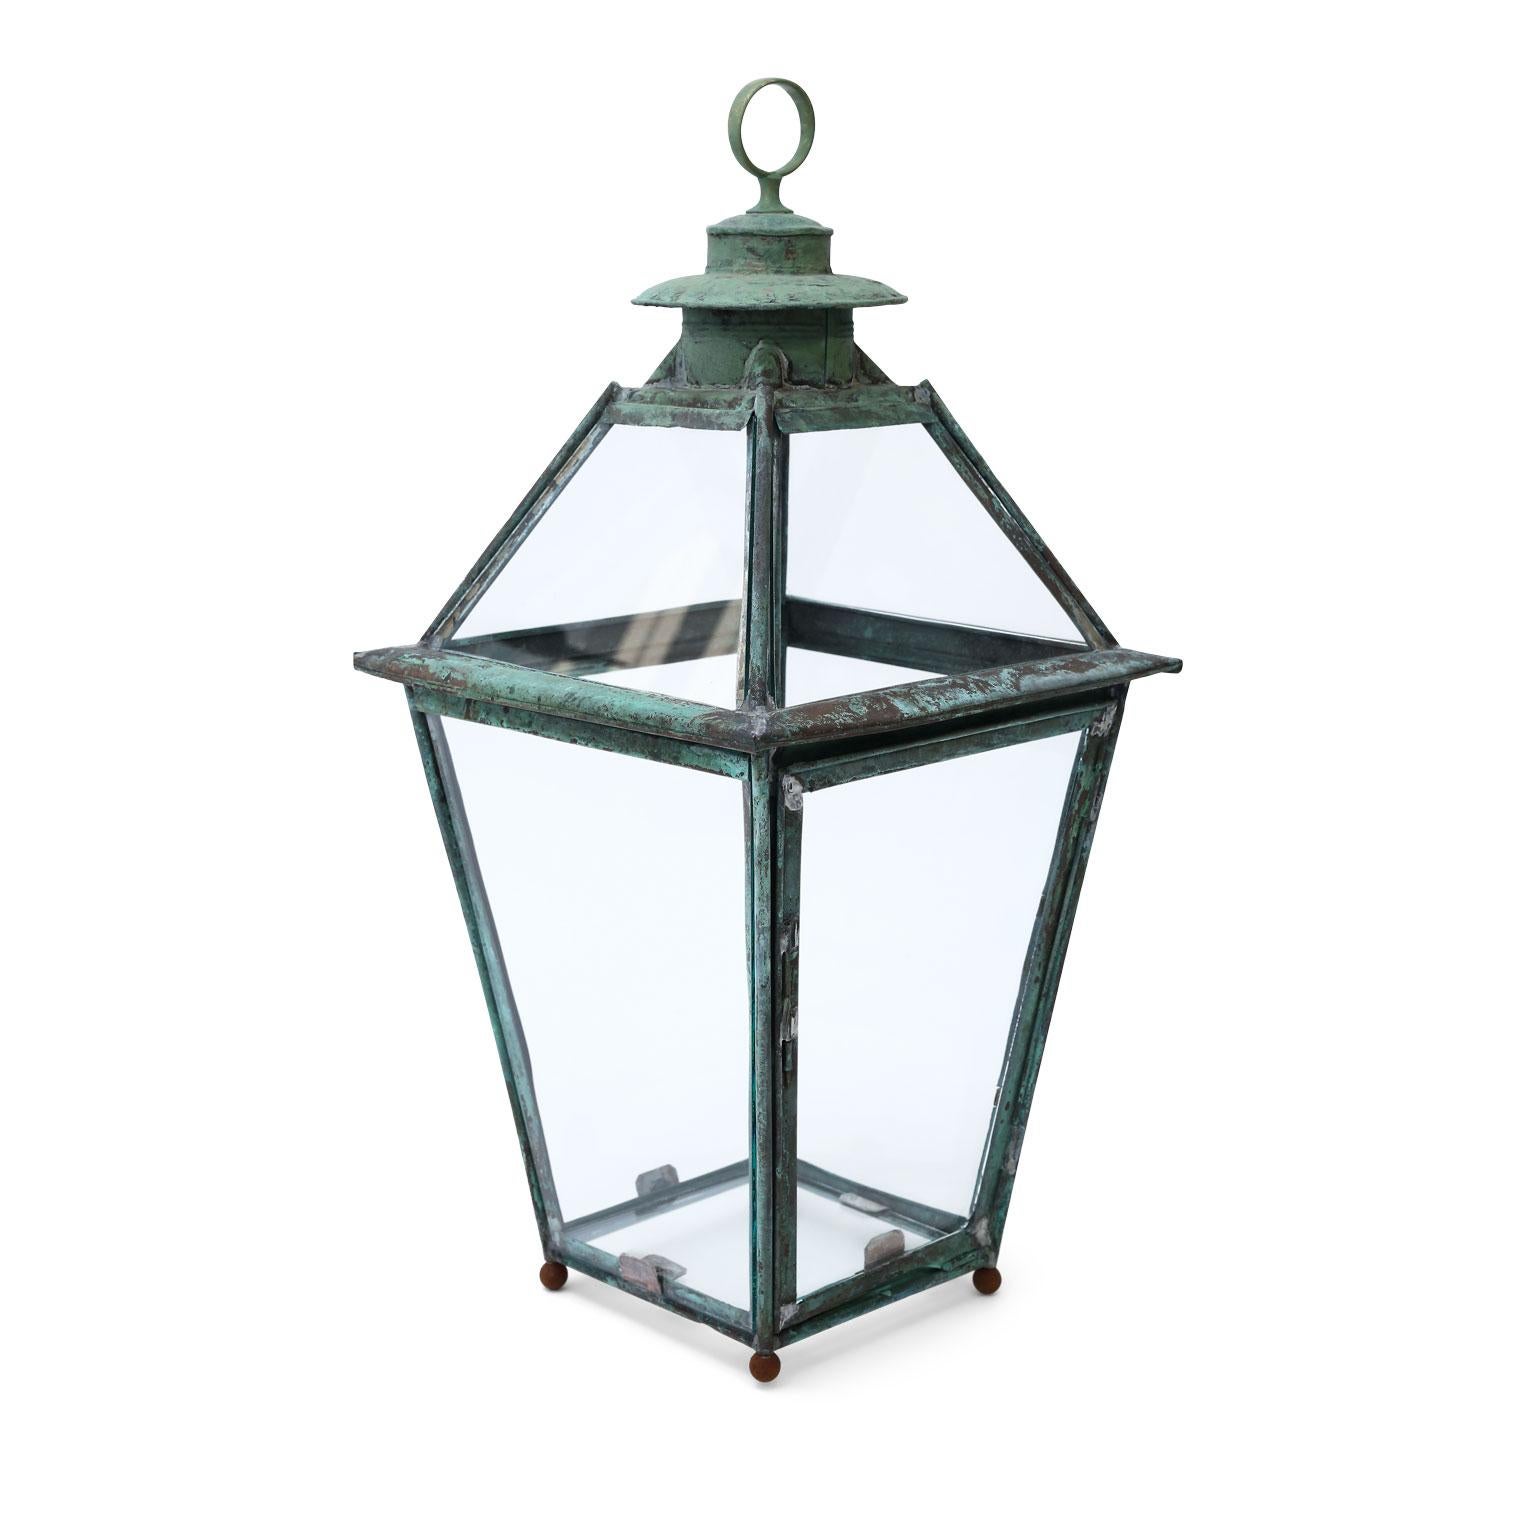 Green verdigris copper and brass French lantern with glass panels dating to the late 19th century. Can be wired for electricity or fitted for usage with gas for an additional cost.